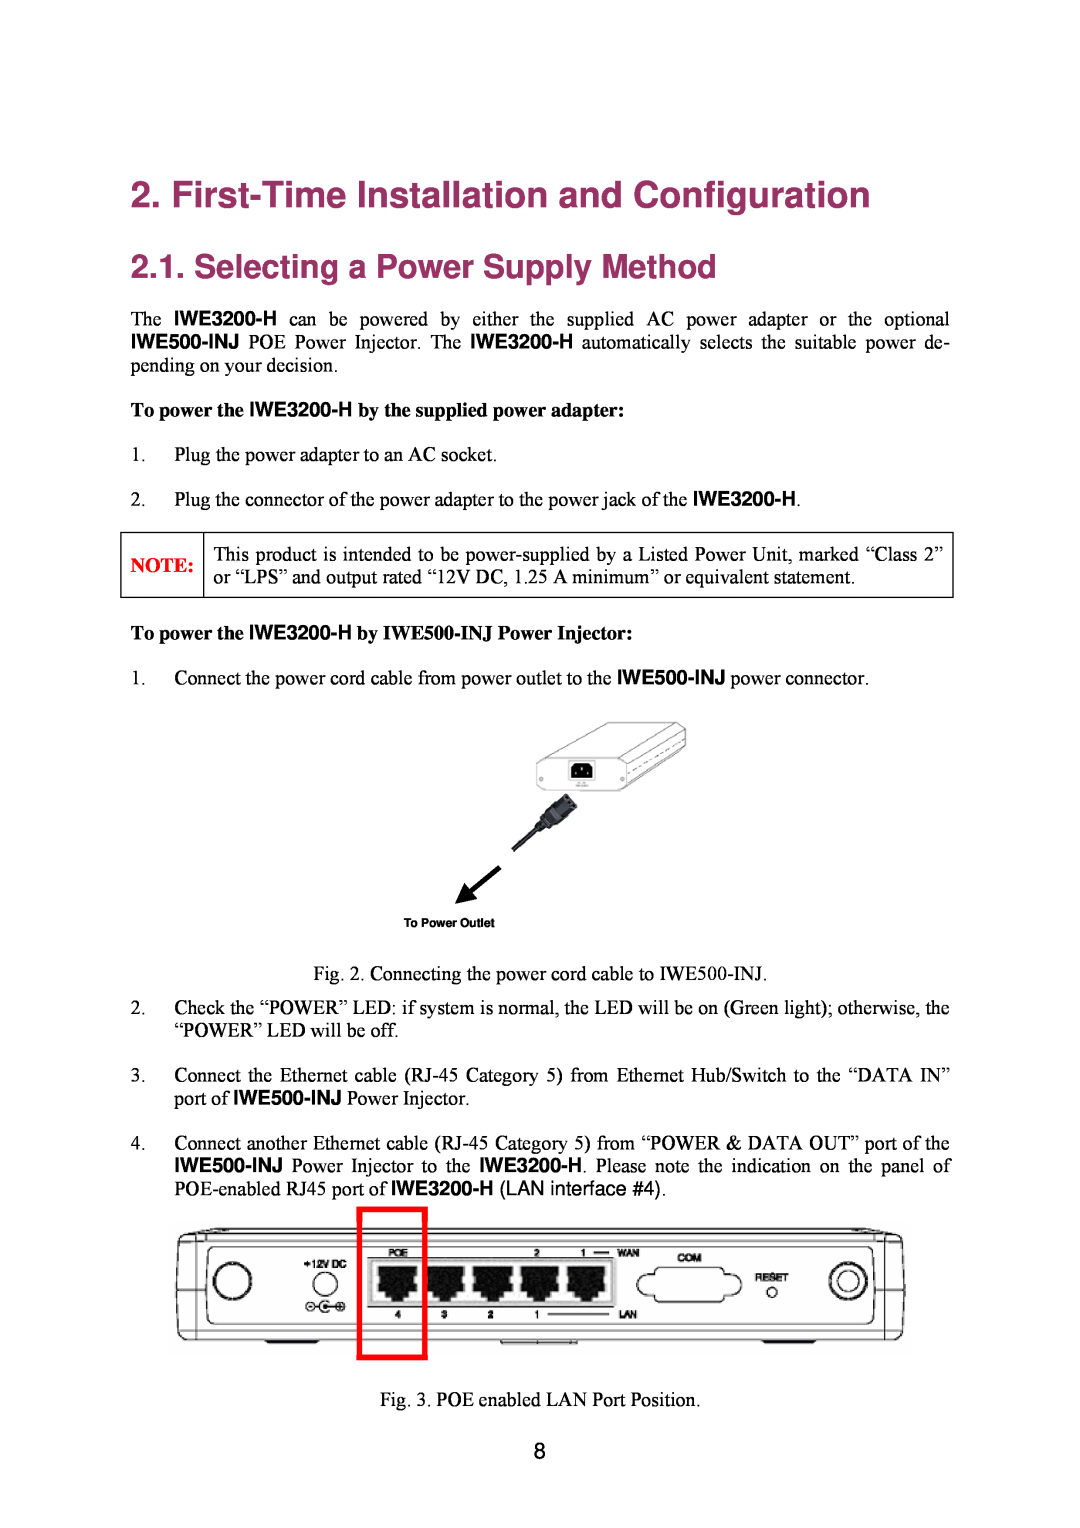 Epson IWE3200-H manual First-TimeInstallation and Configuration, Selecting a Power Supply Method 